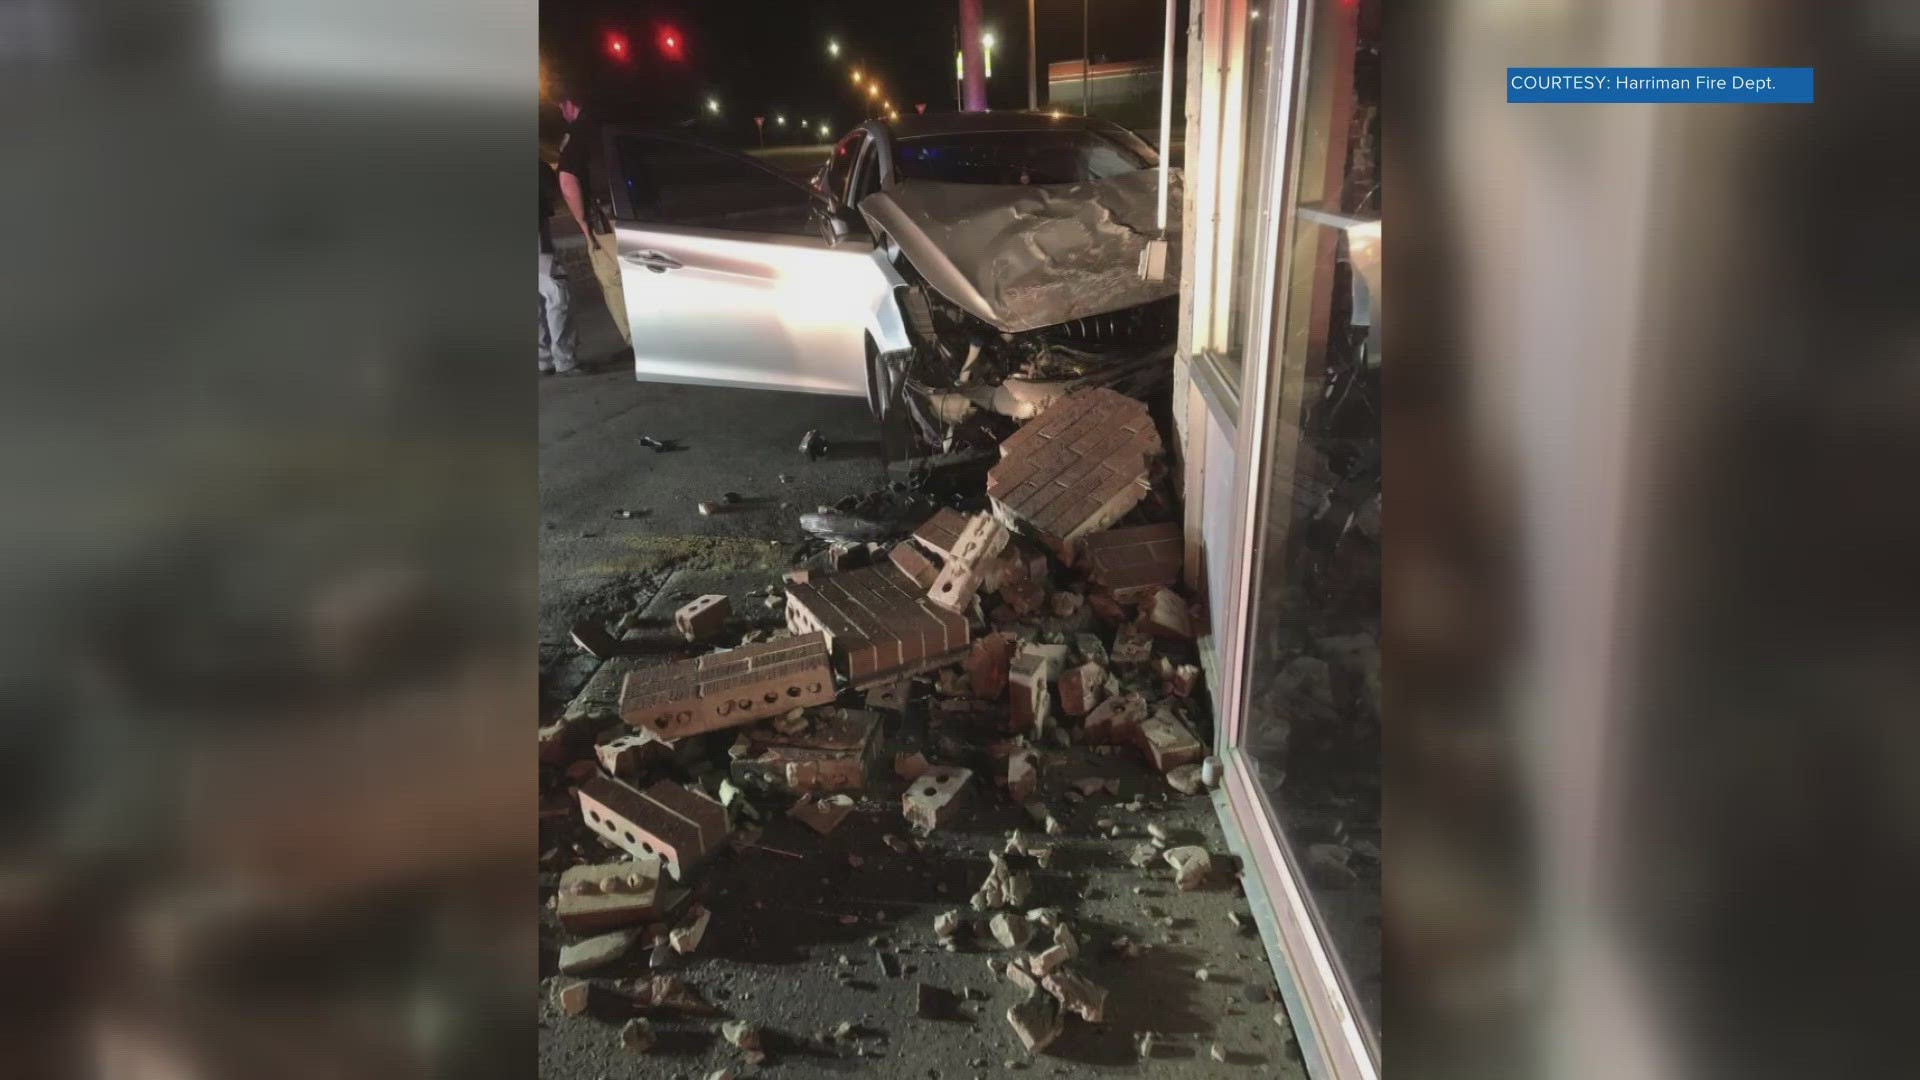 A car lost control and hit a building on South Roane Street around 3 a.m. Sunday, according to the Harriman Fire Department.